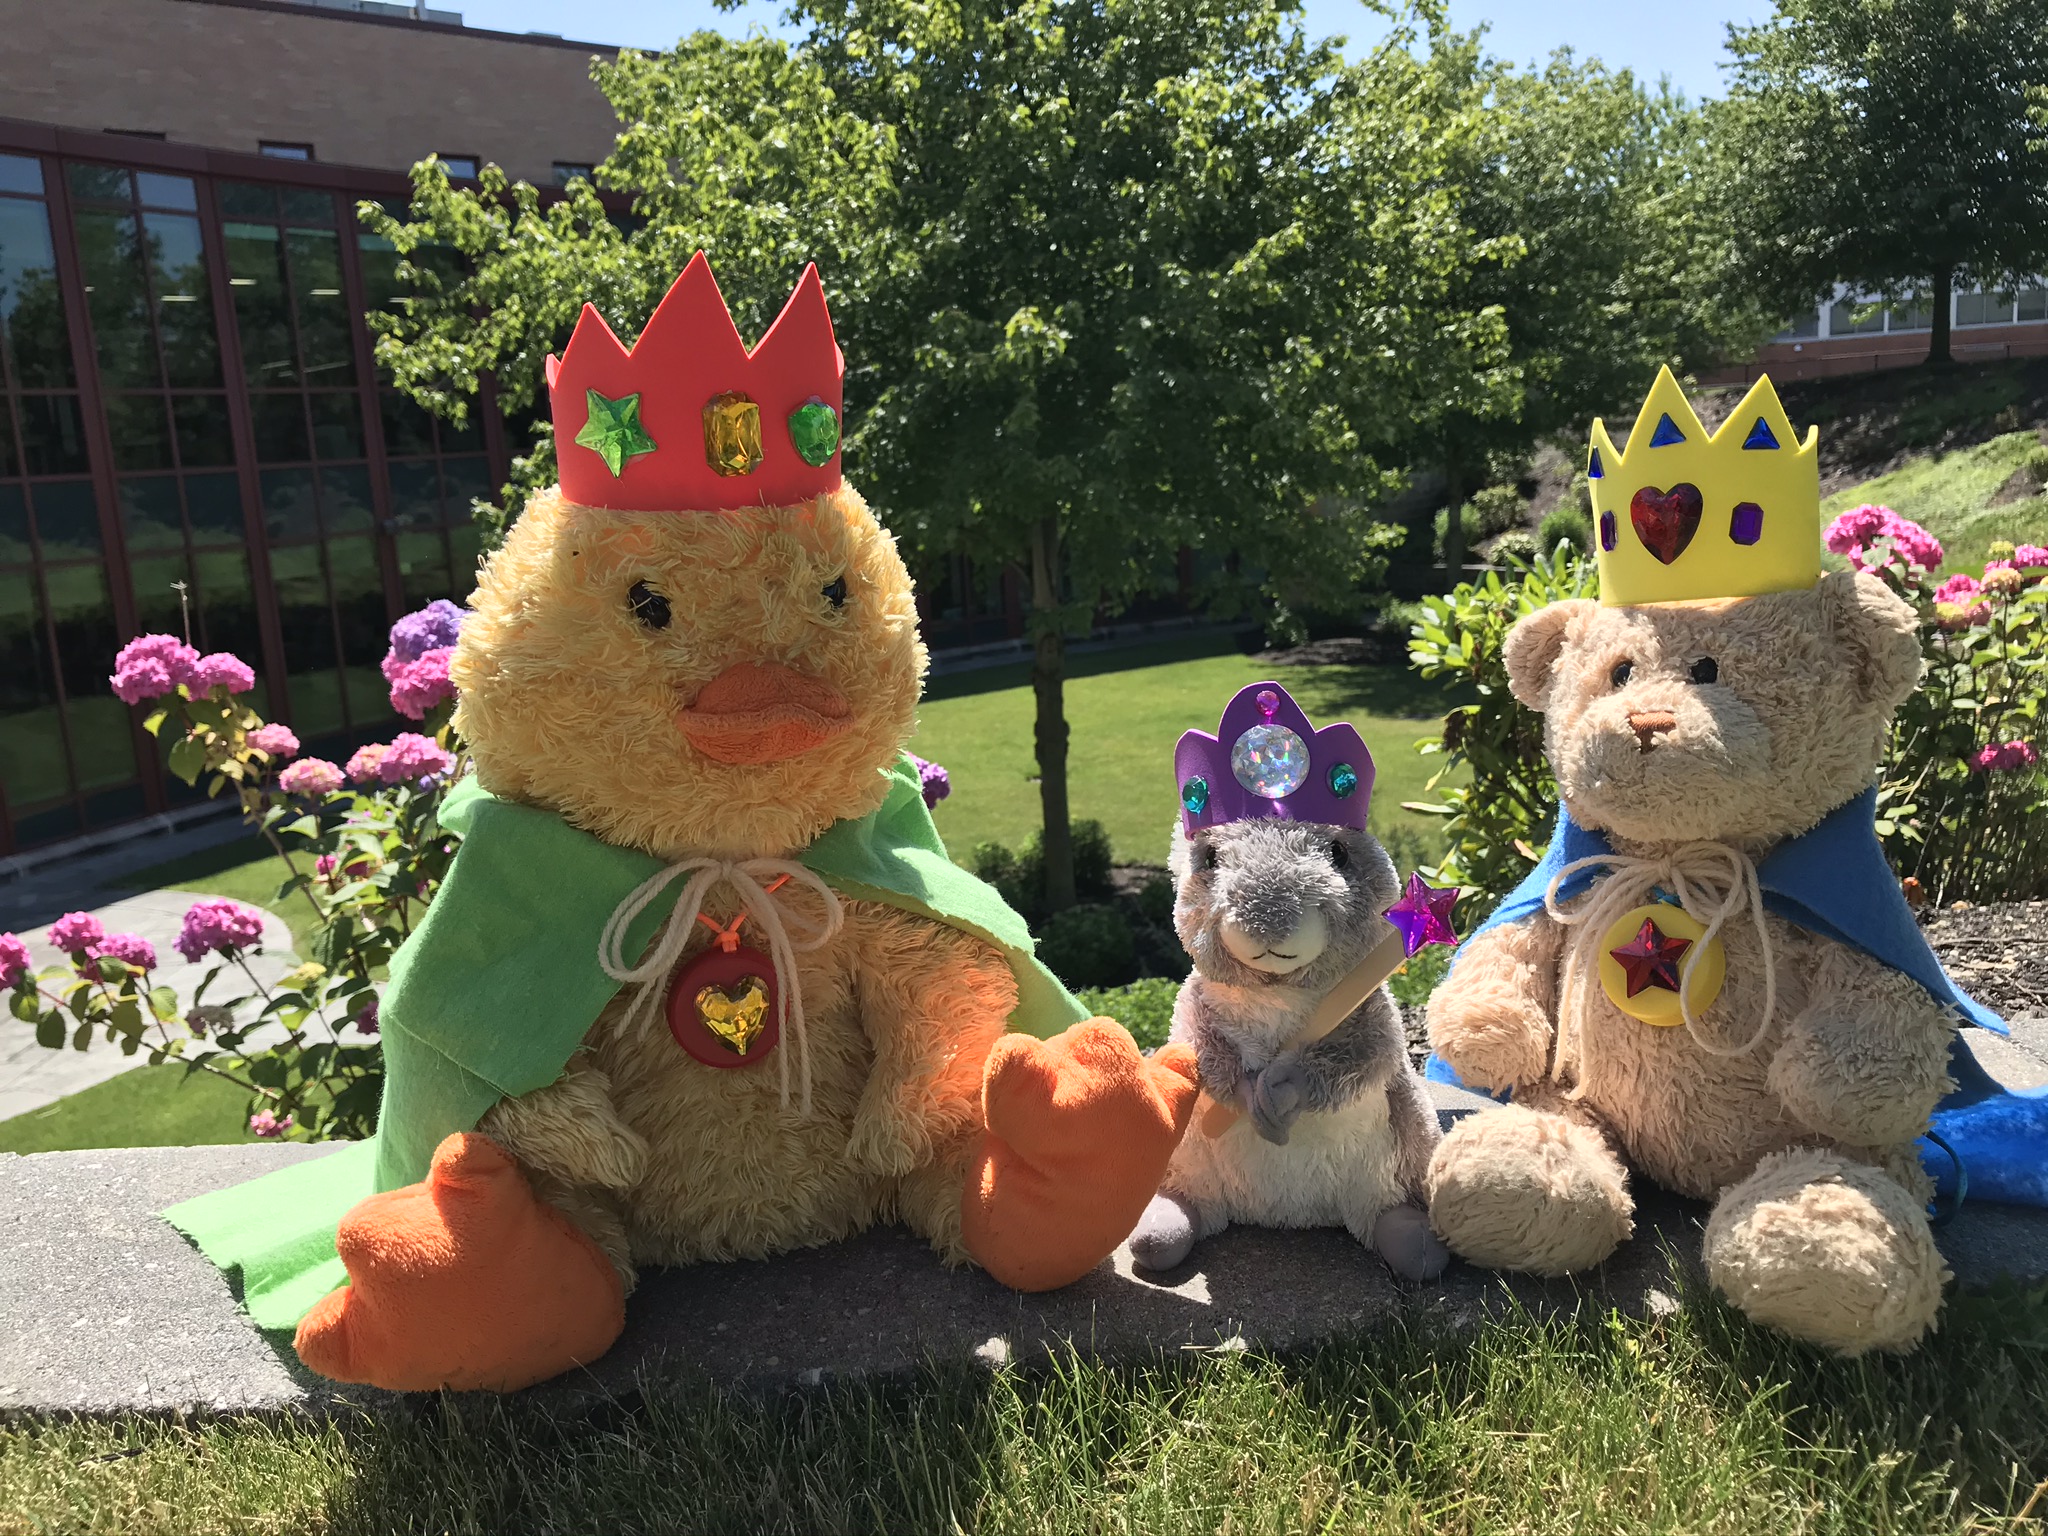 Stuffed animals wearing crowns and cloaks